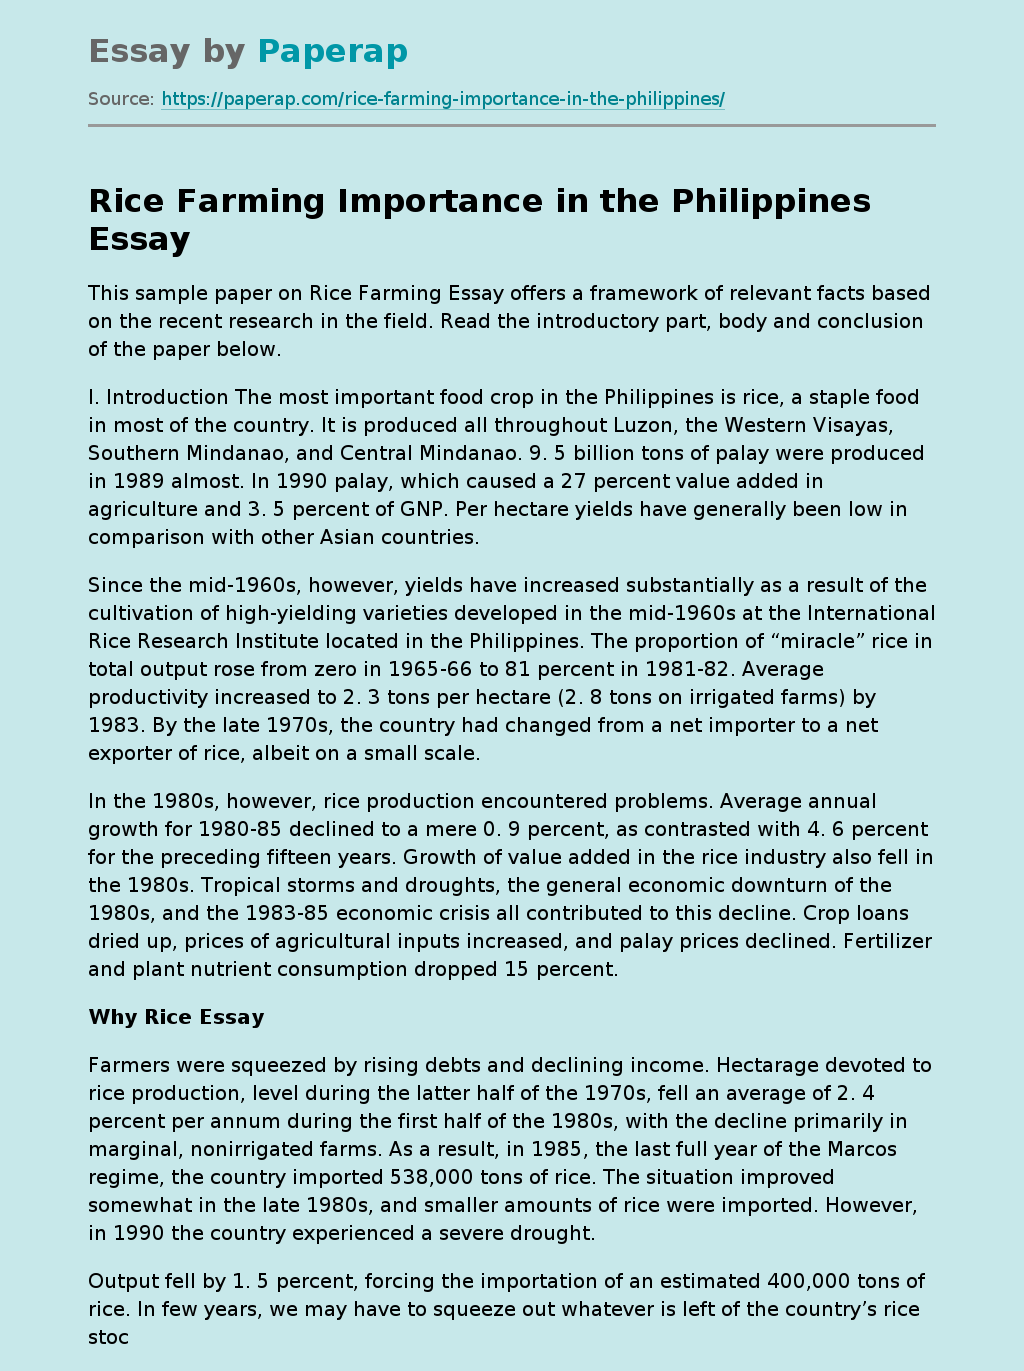 Rice Farming Importance in the Philippines